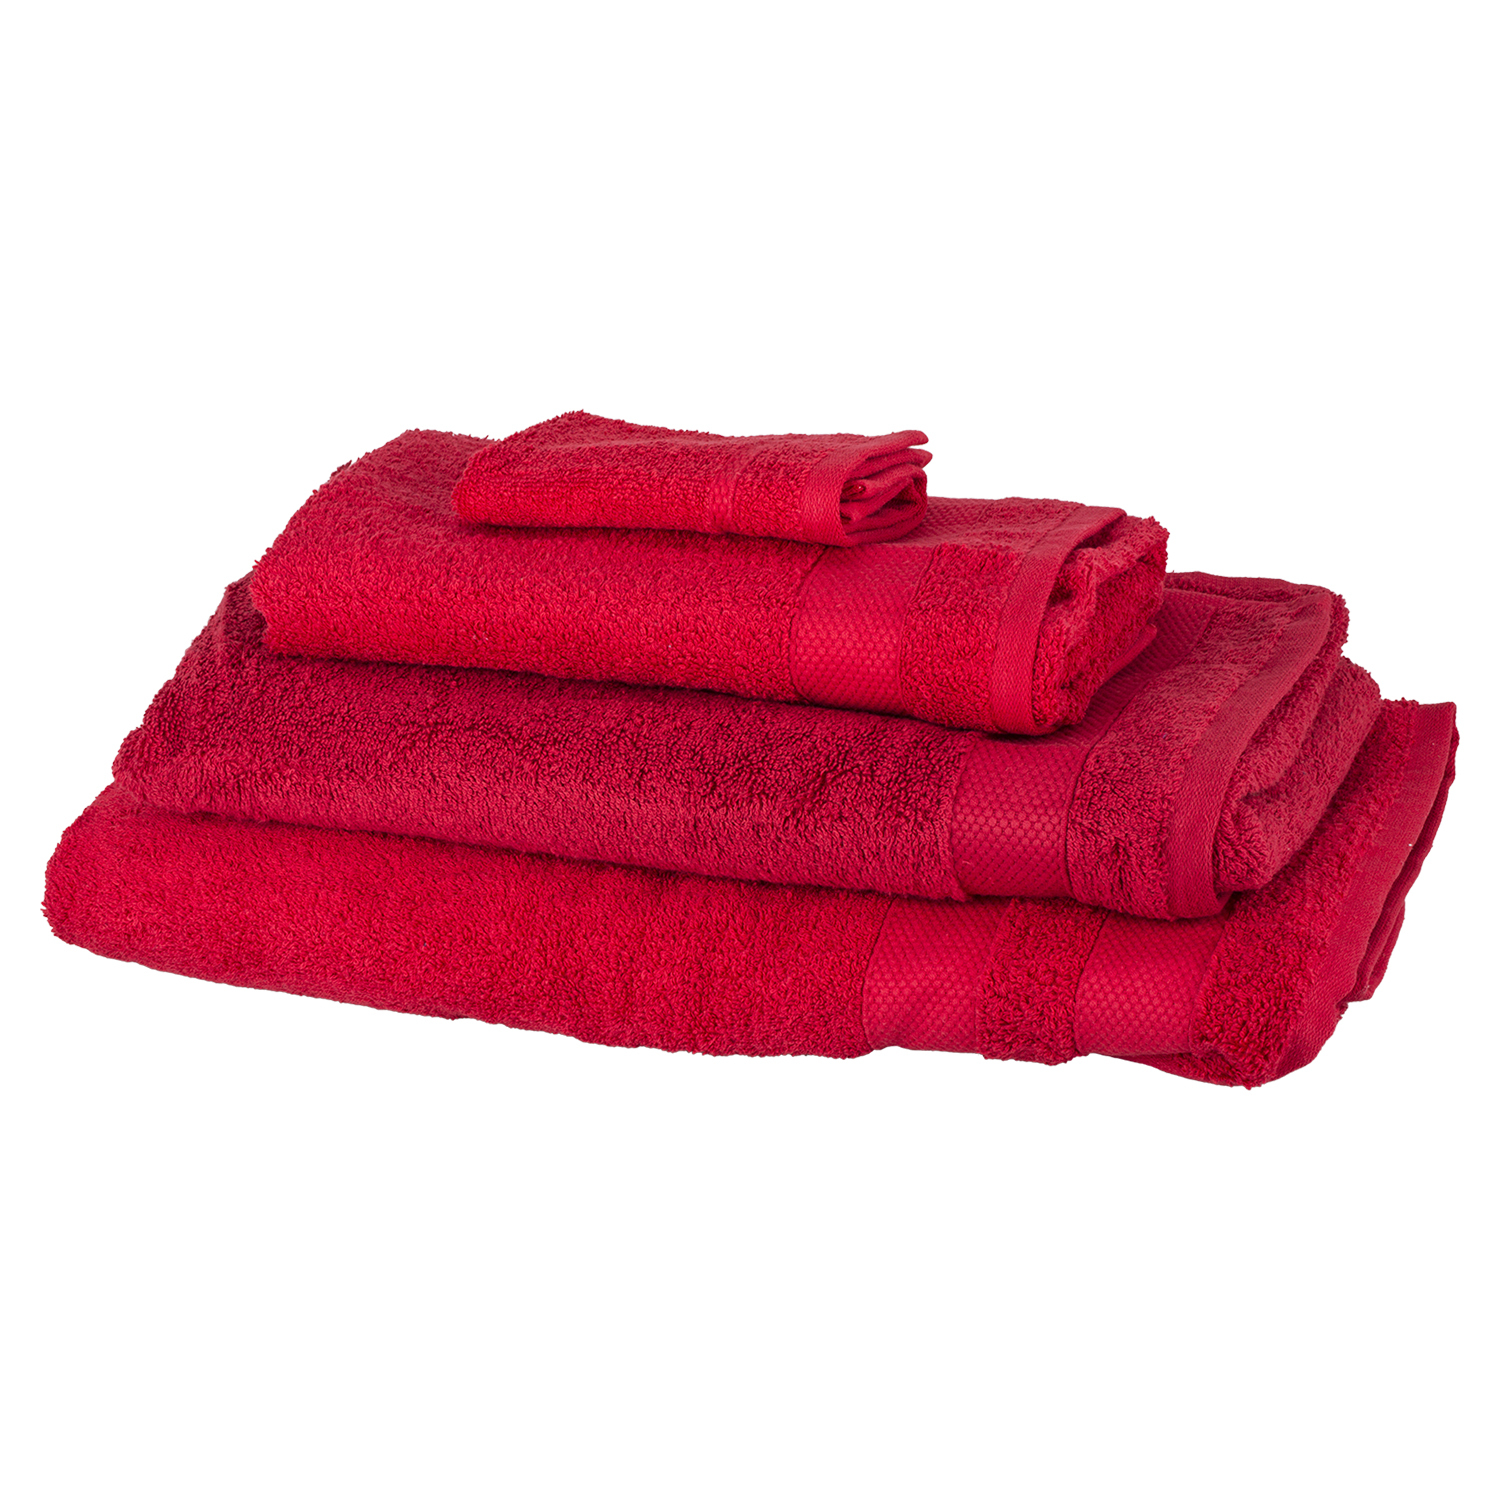 Egyptian Cotton Hand Towel - Red Image